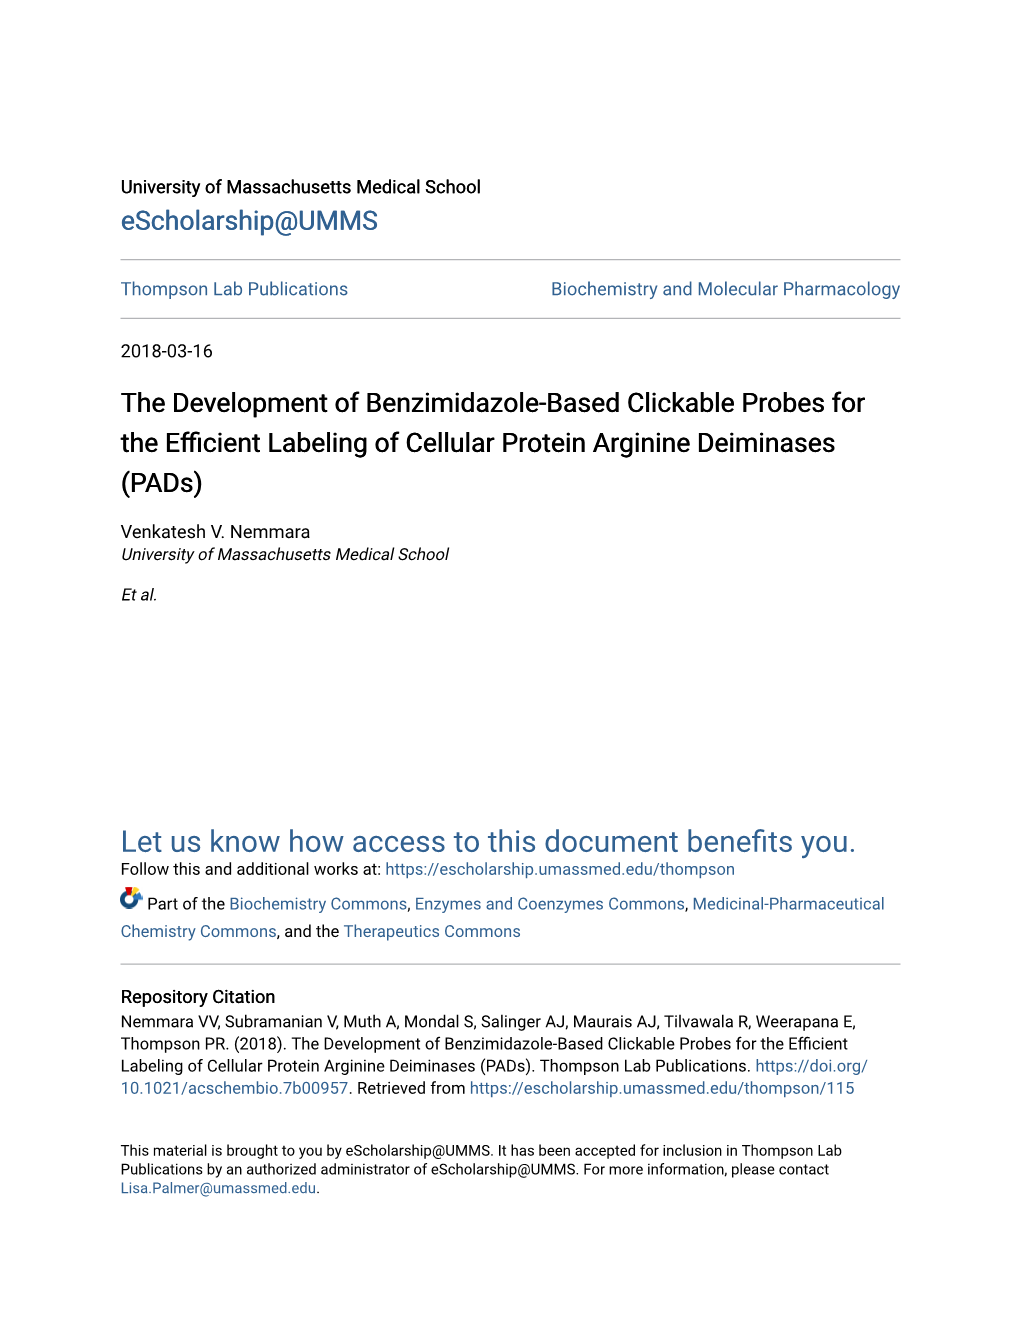 The Development of Benzimidazole-Based Clickable Probes for the Efficient Labeling of Cellular Oteinpr Arginine Deiminases (Pads)